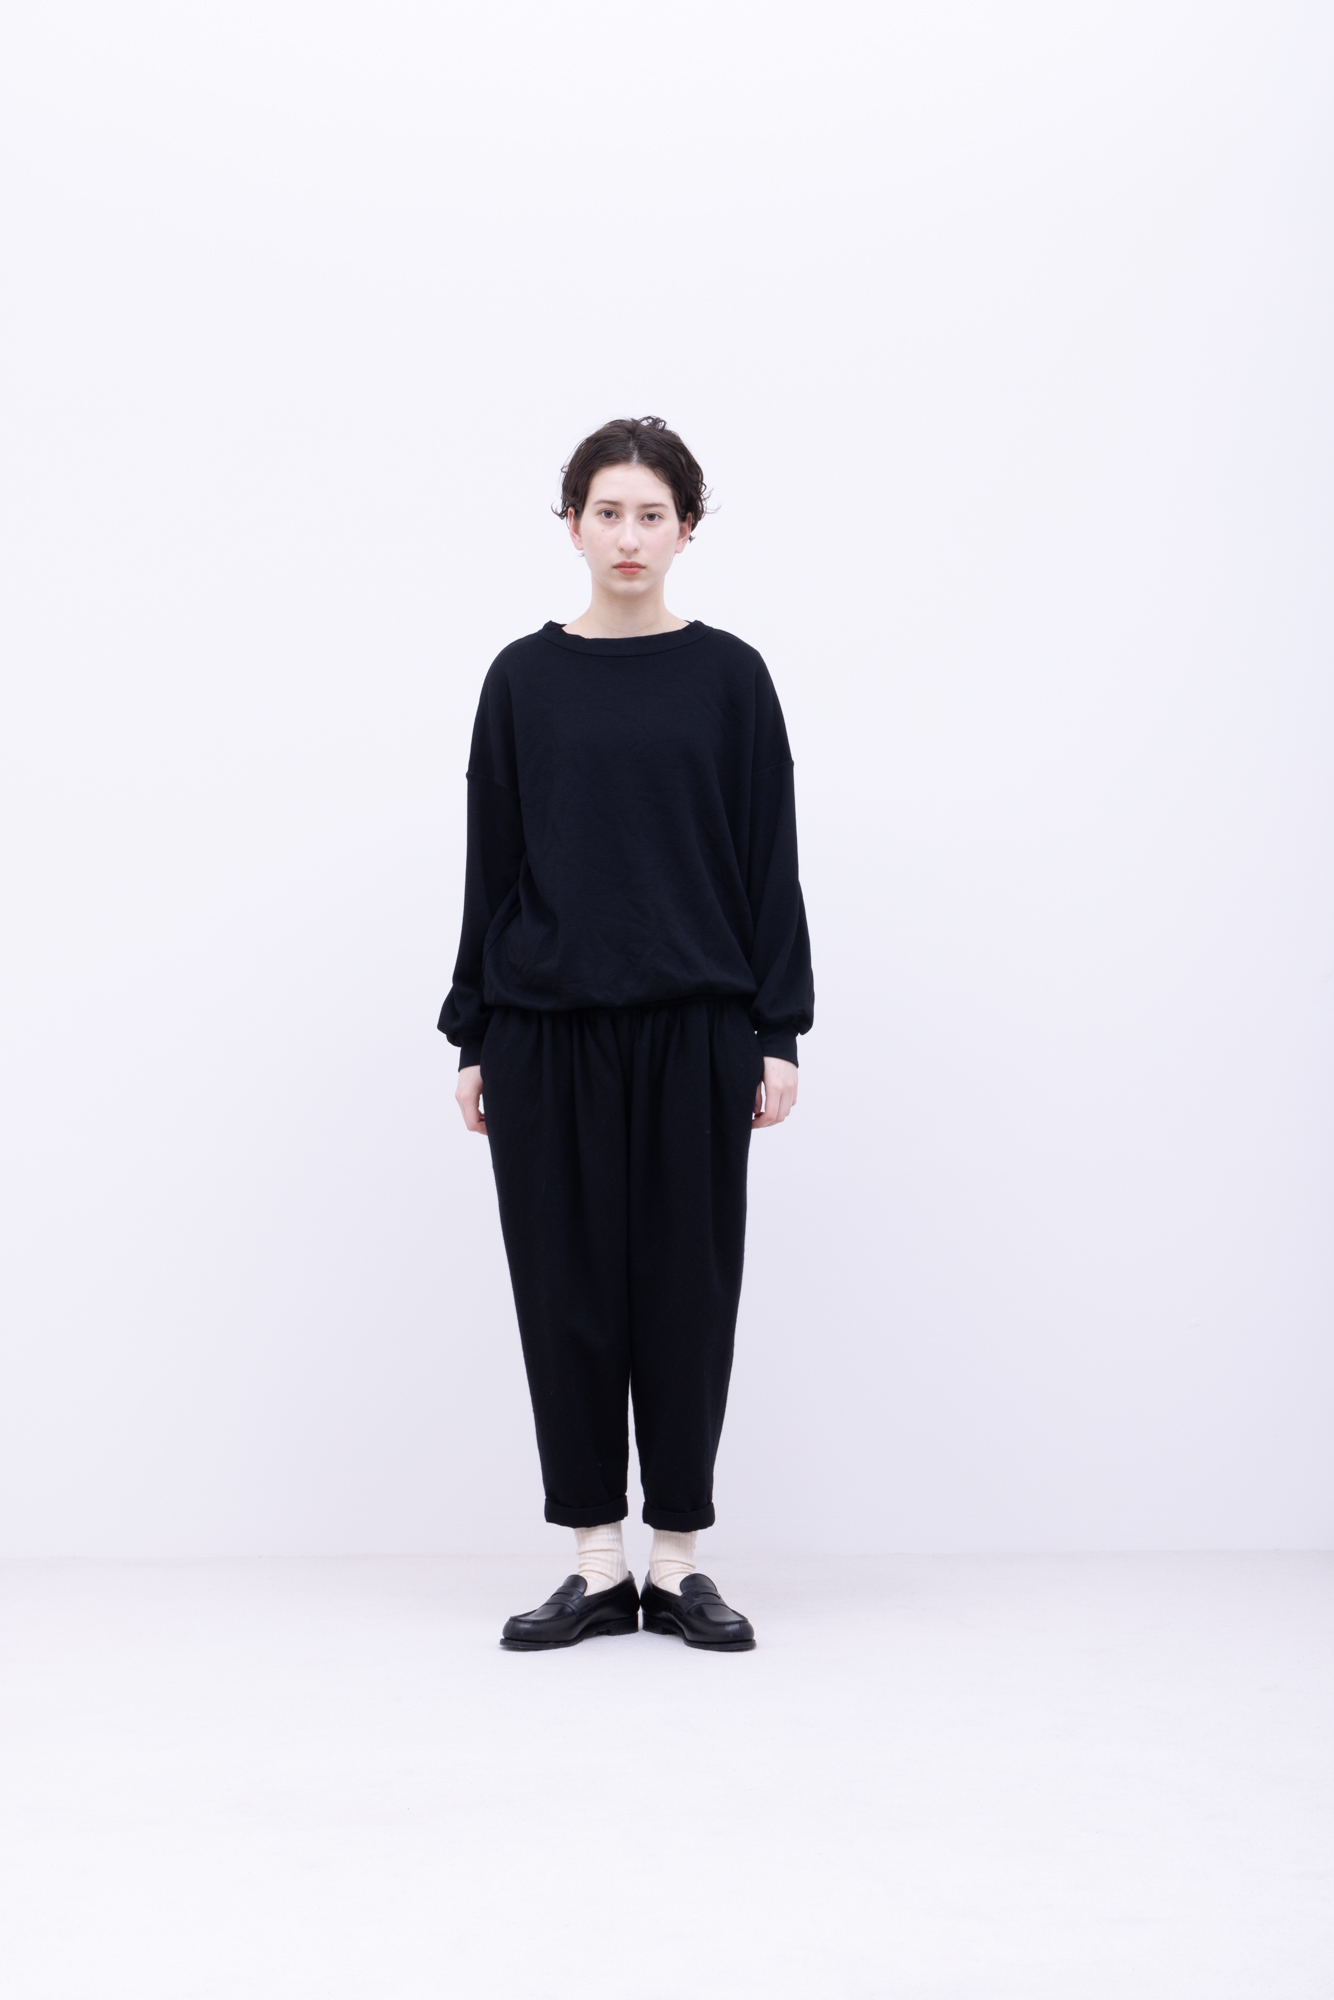 No. 051 | 2023 AW WOMENS / Model H=169cm | LOOK | FIRMUM